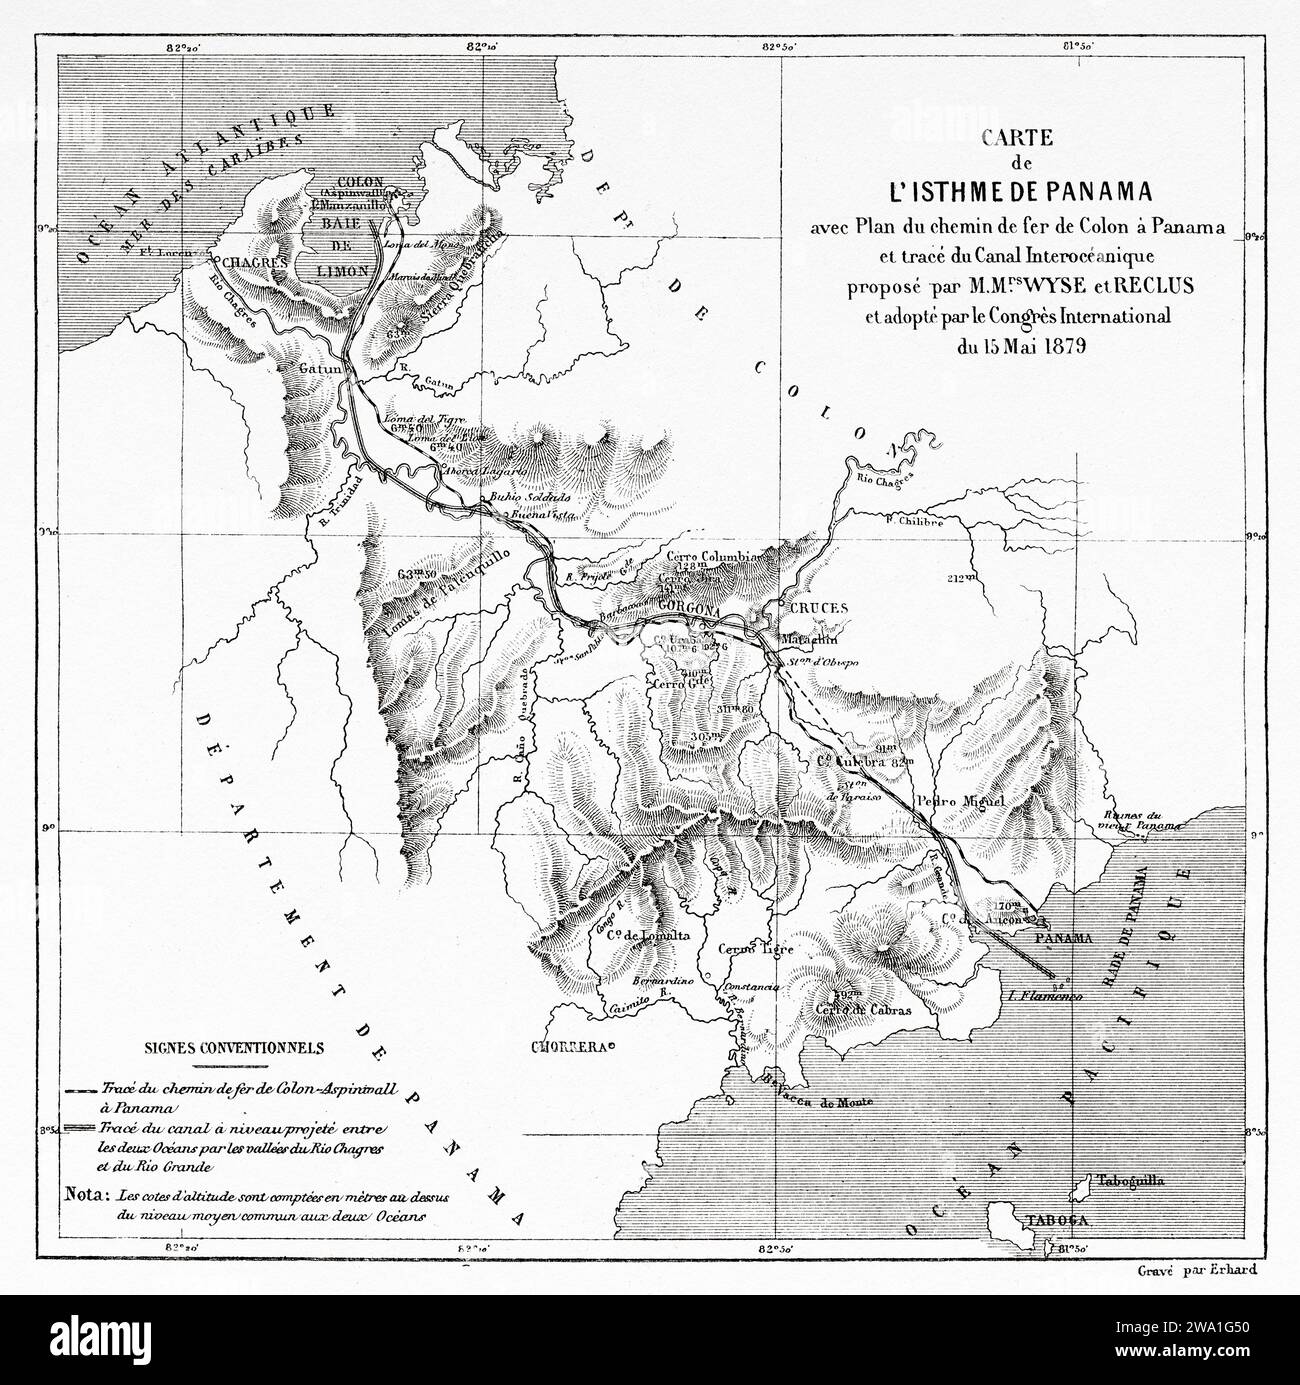 Map of the Isthmus of Panama with Plan of the Railroad from Colon to Panama and Trace of the Interoceanic Canal Proposed by Wyse and Reclus and Adopted by the International Congress of May 15, 1879. Republic of Panama. Central America. Explorations in the Isthmus of Panama and Darien 1876-1878 by Armand Reclus (1843 - 1927) Old 19th century engraving from Le Tour du Monde 1880 Stock Photo